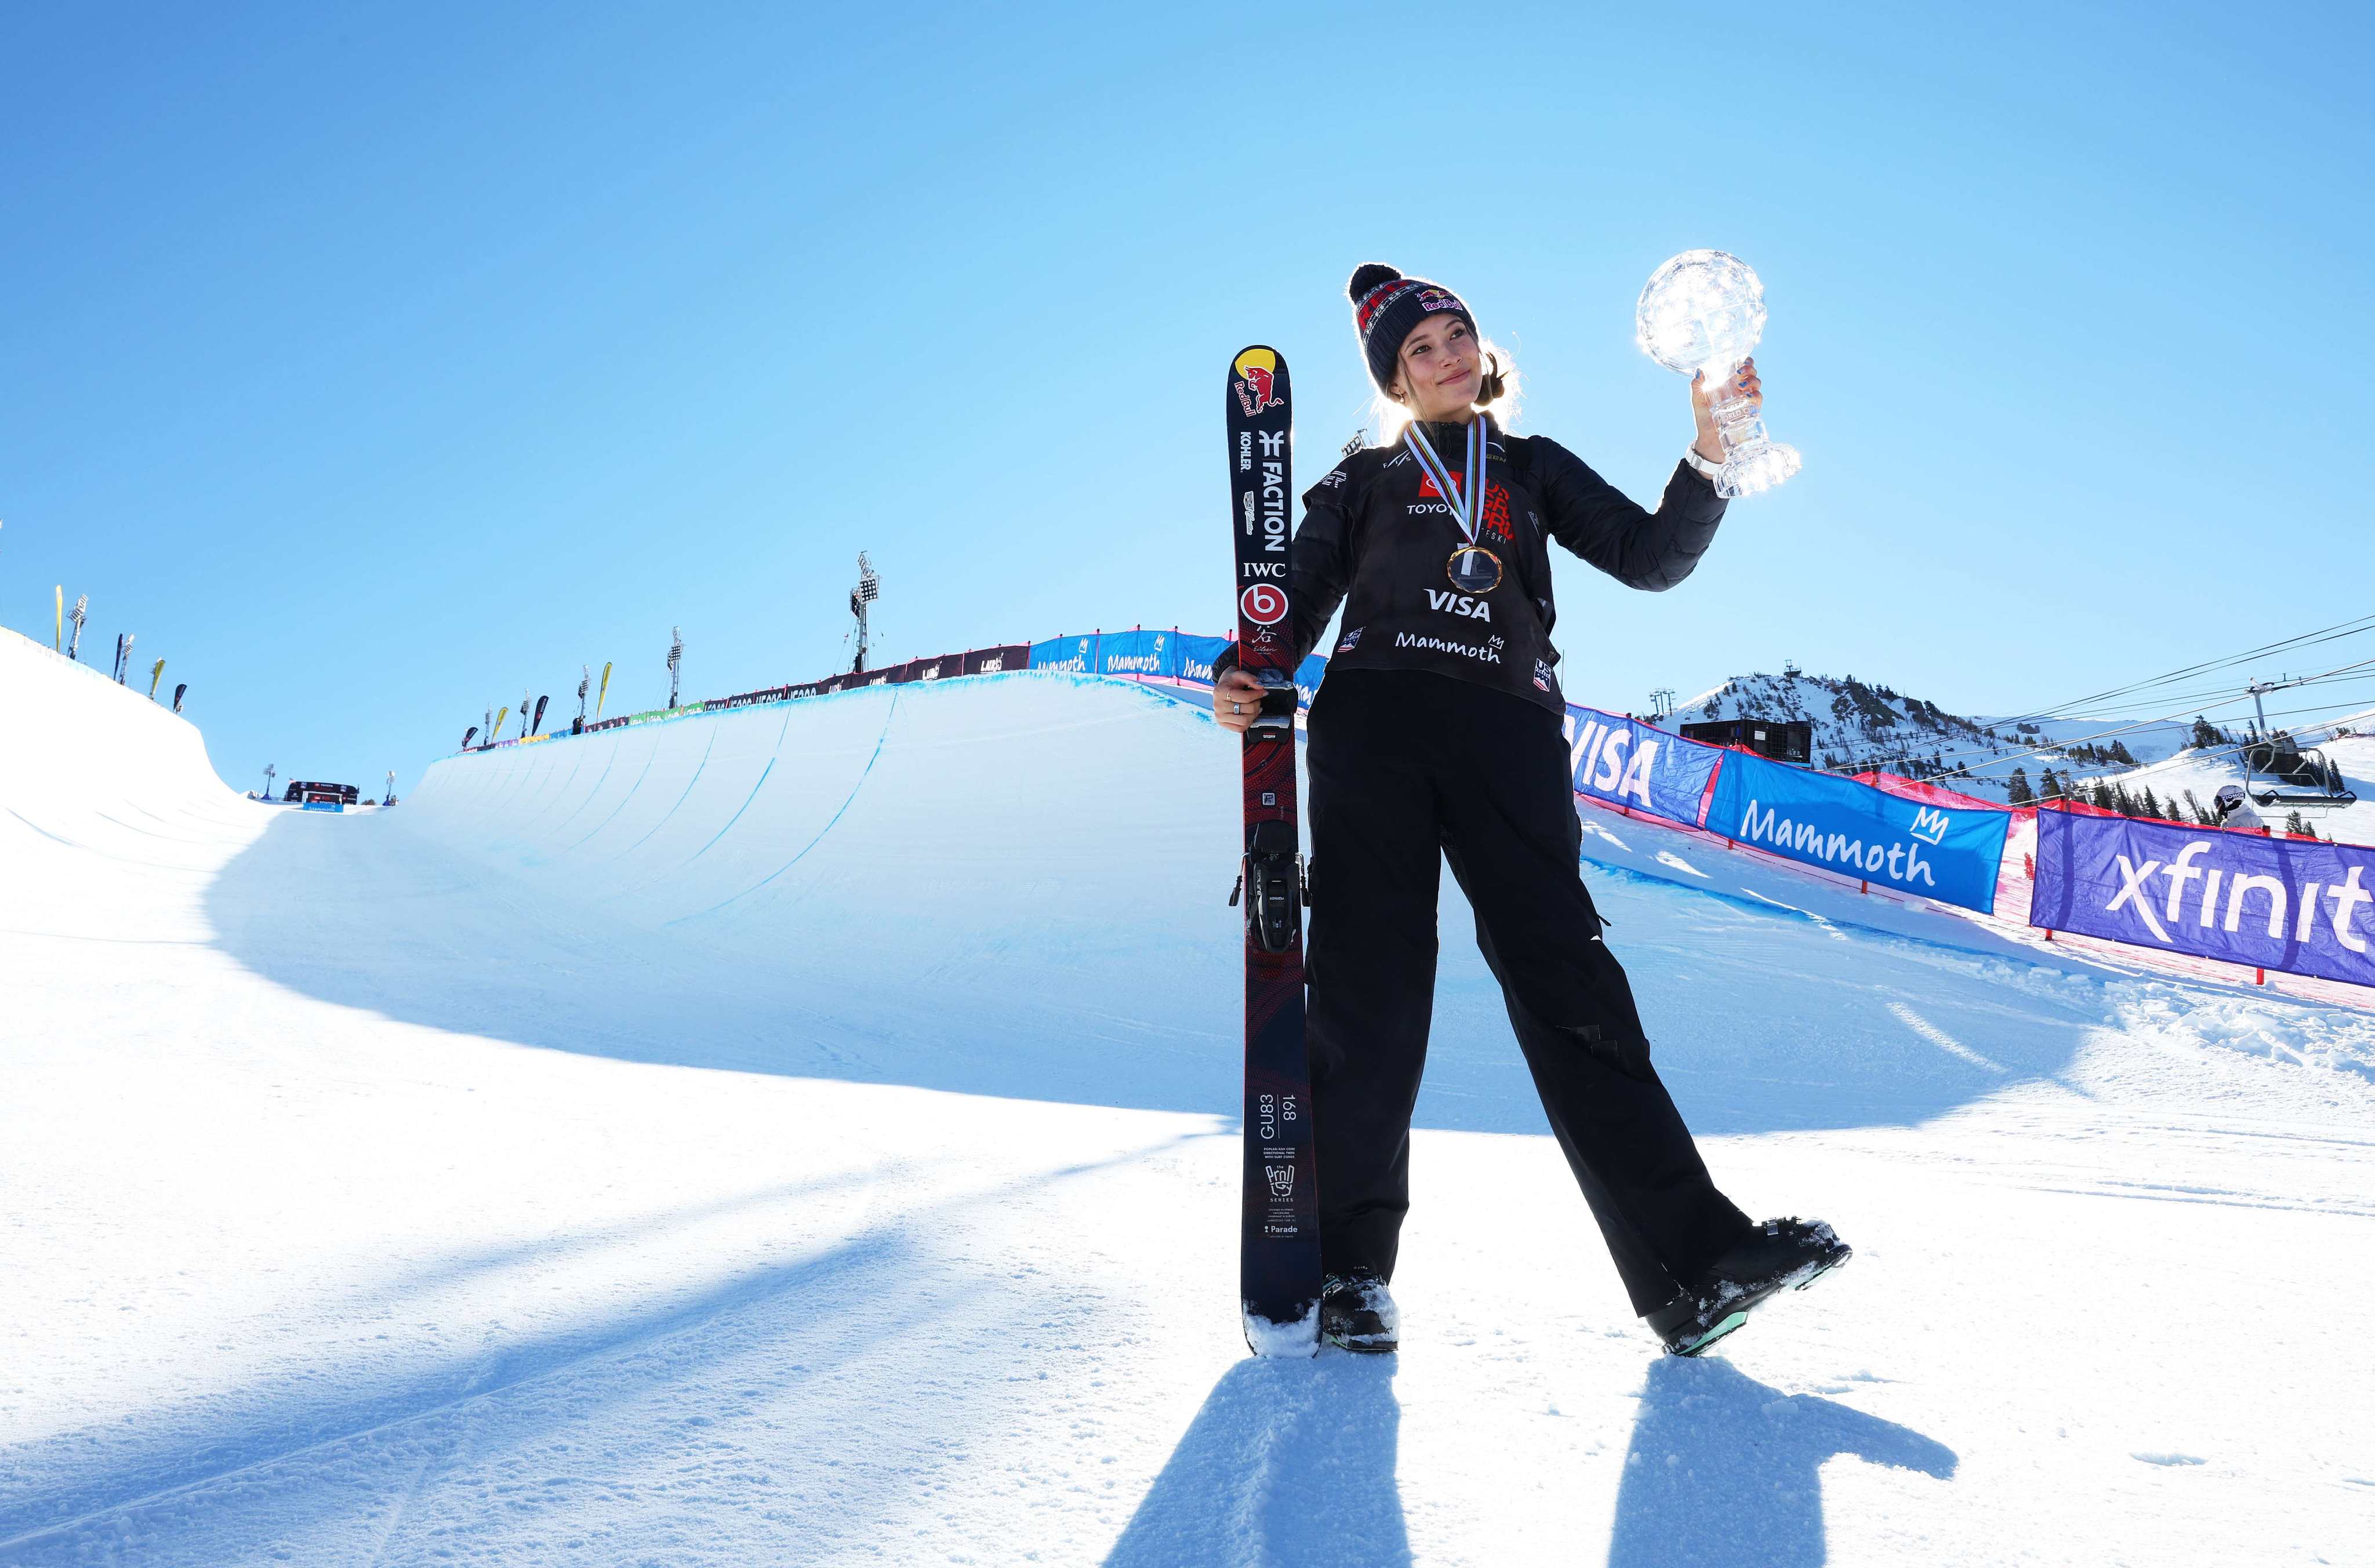 Winter Games: Eileen Gu, the freestyle skiing Vogue cover girl chasing  Olympic history in Beijing